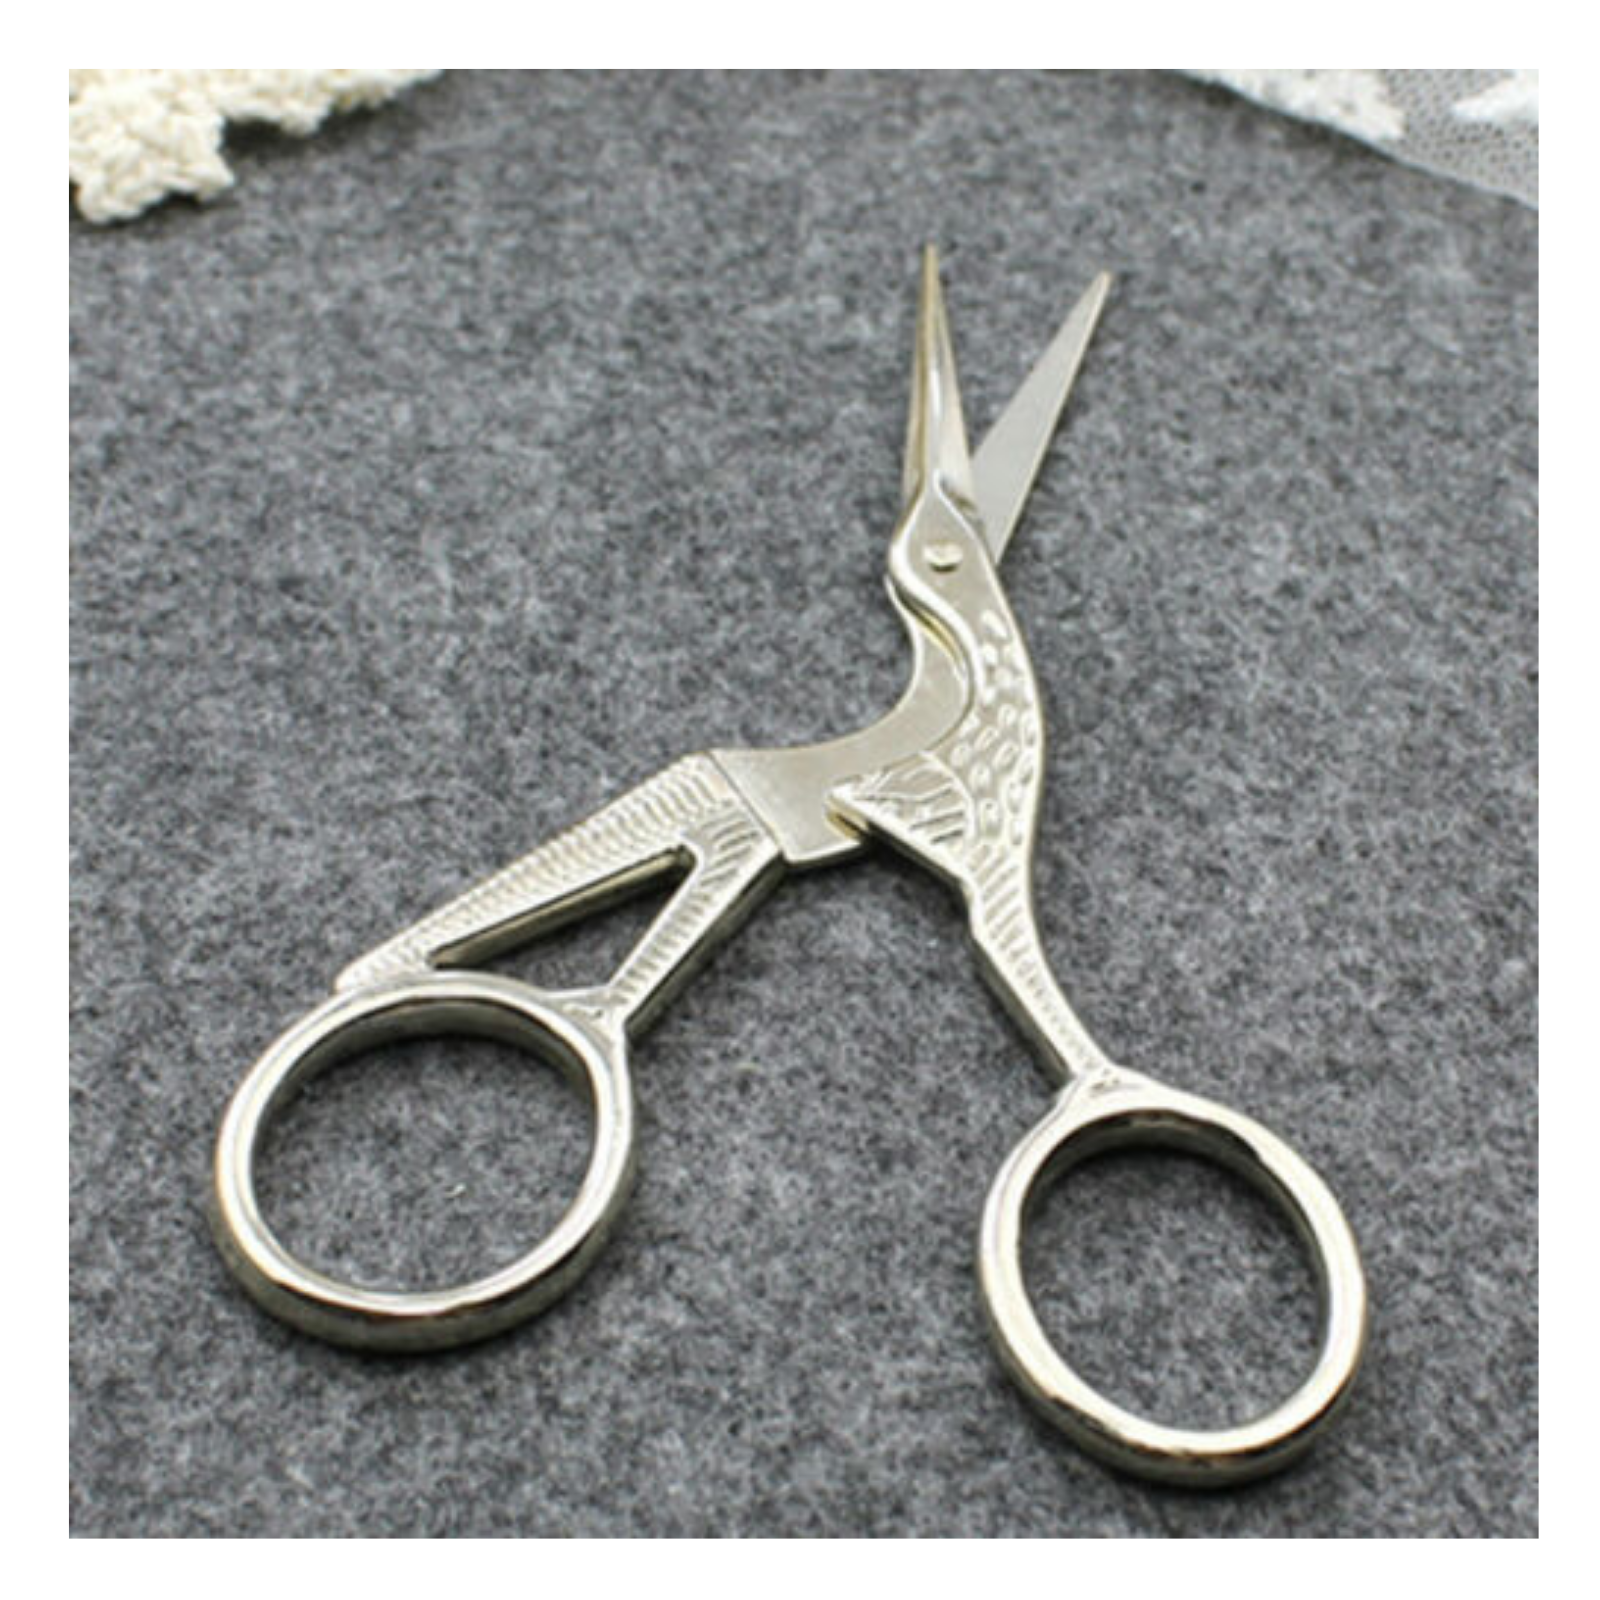 Gingher Embroidery Scissors, Needlepoint, Crewel, Sewing, 3.5